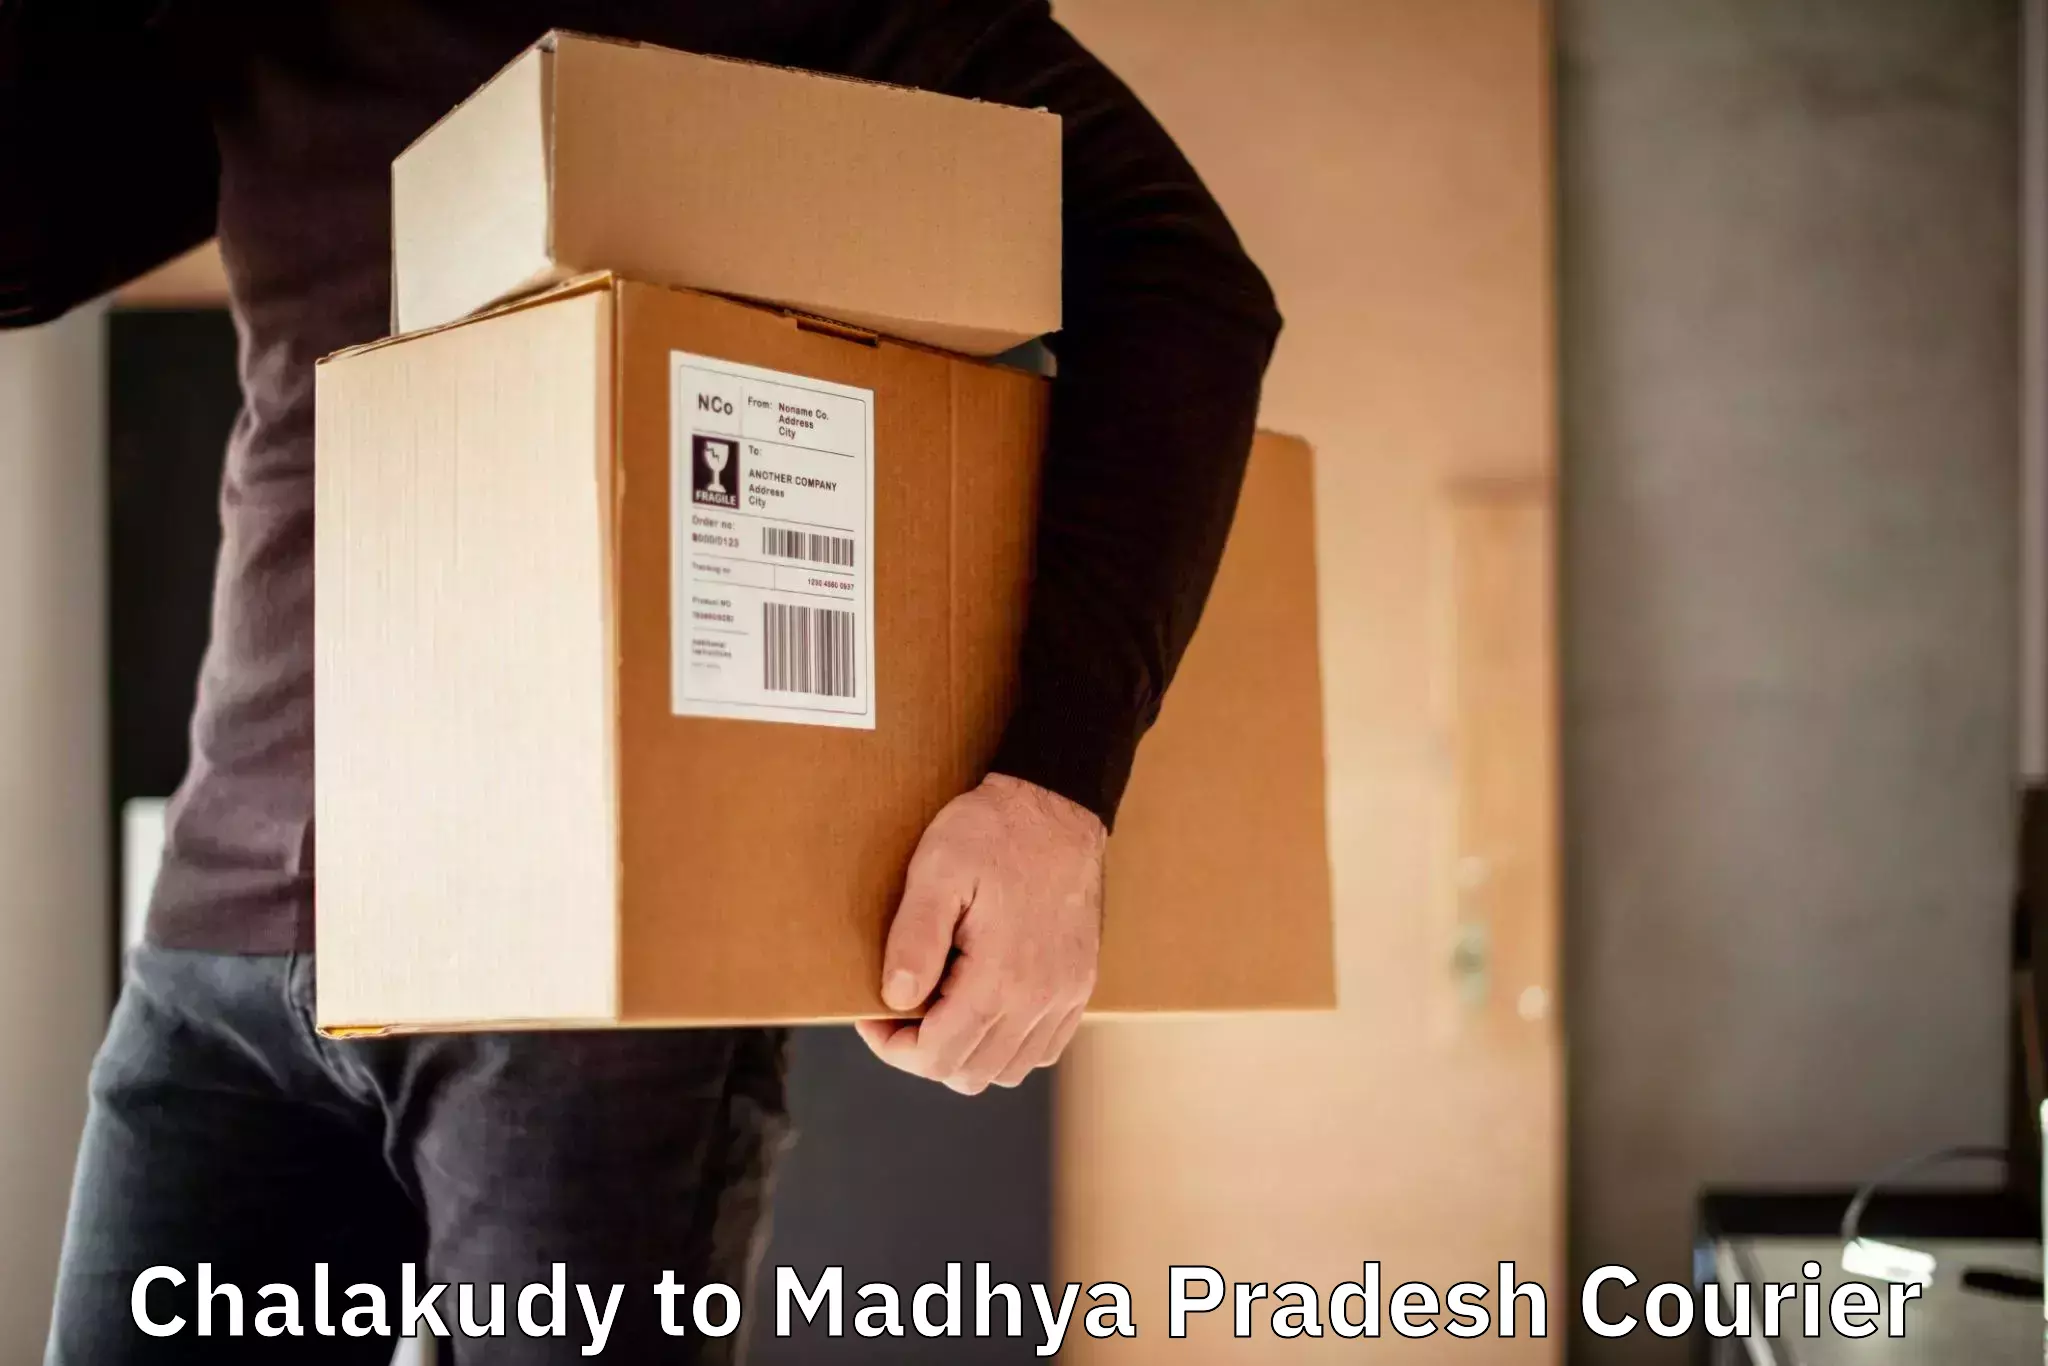 Express courier capabilities Chalakudy to Jabalpur